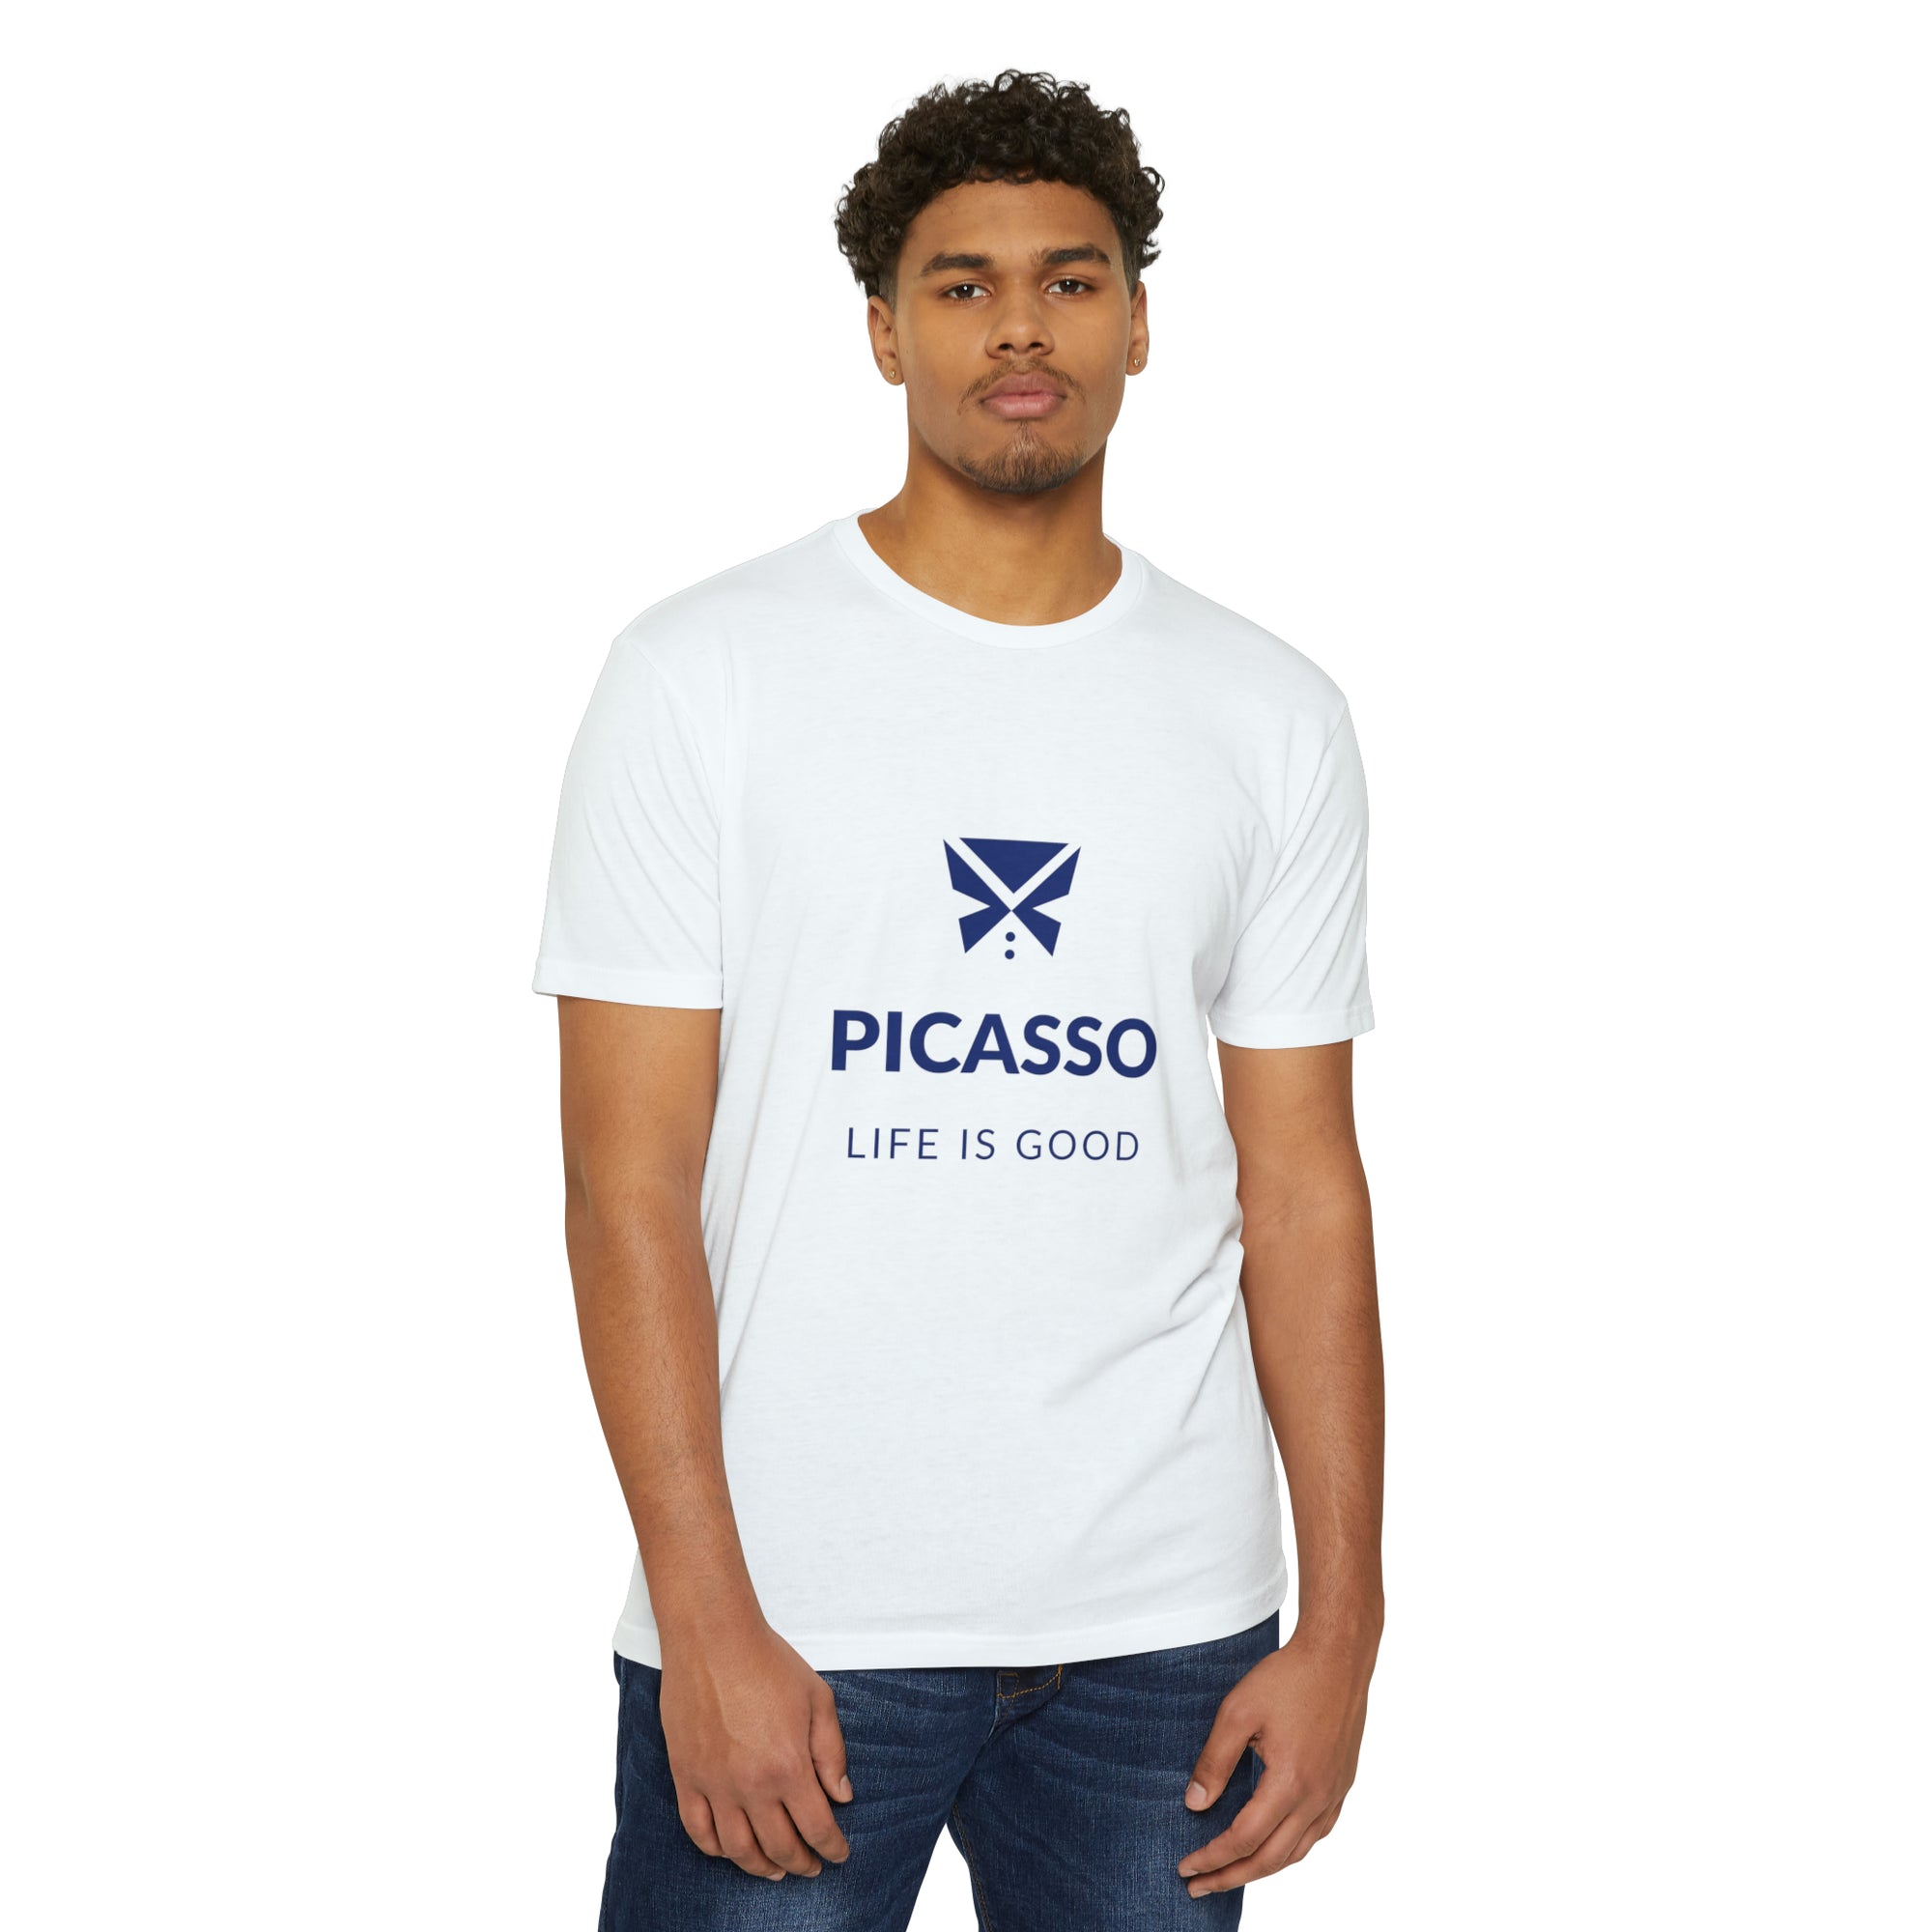 Picasso - Life Is Good T-shirt